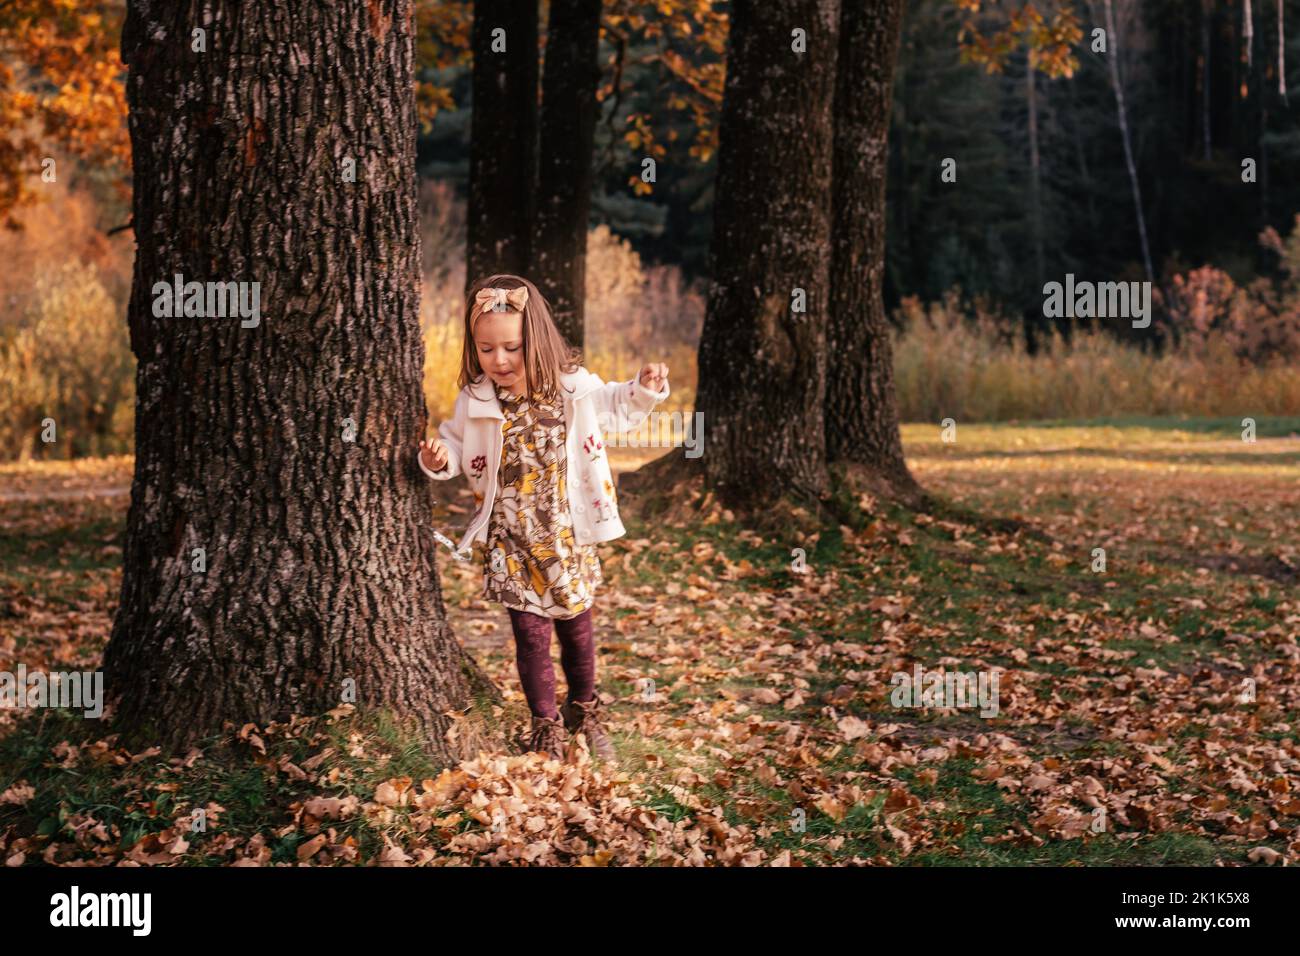 Little girl 3-4 years old runs on autumn leaves outdoor near large thick oak trunks in park in rays of setting sun and smiles. Dark haired child in Stock Photo